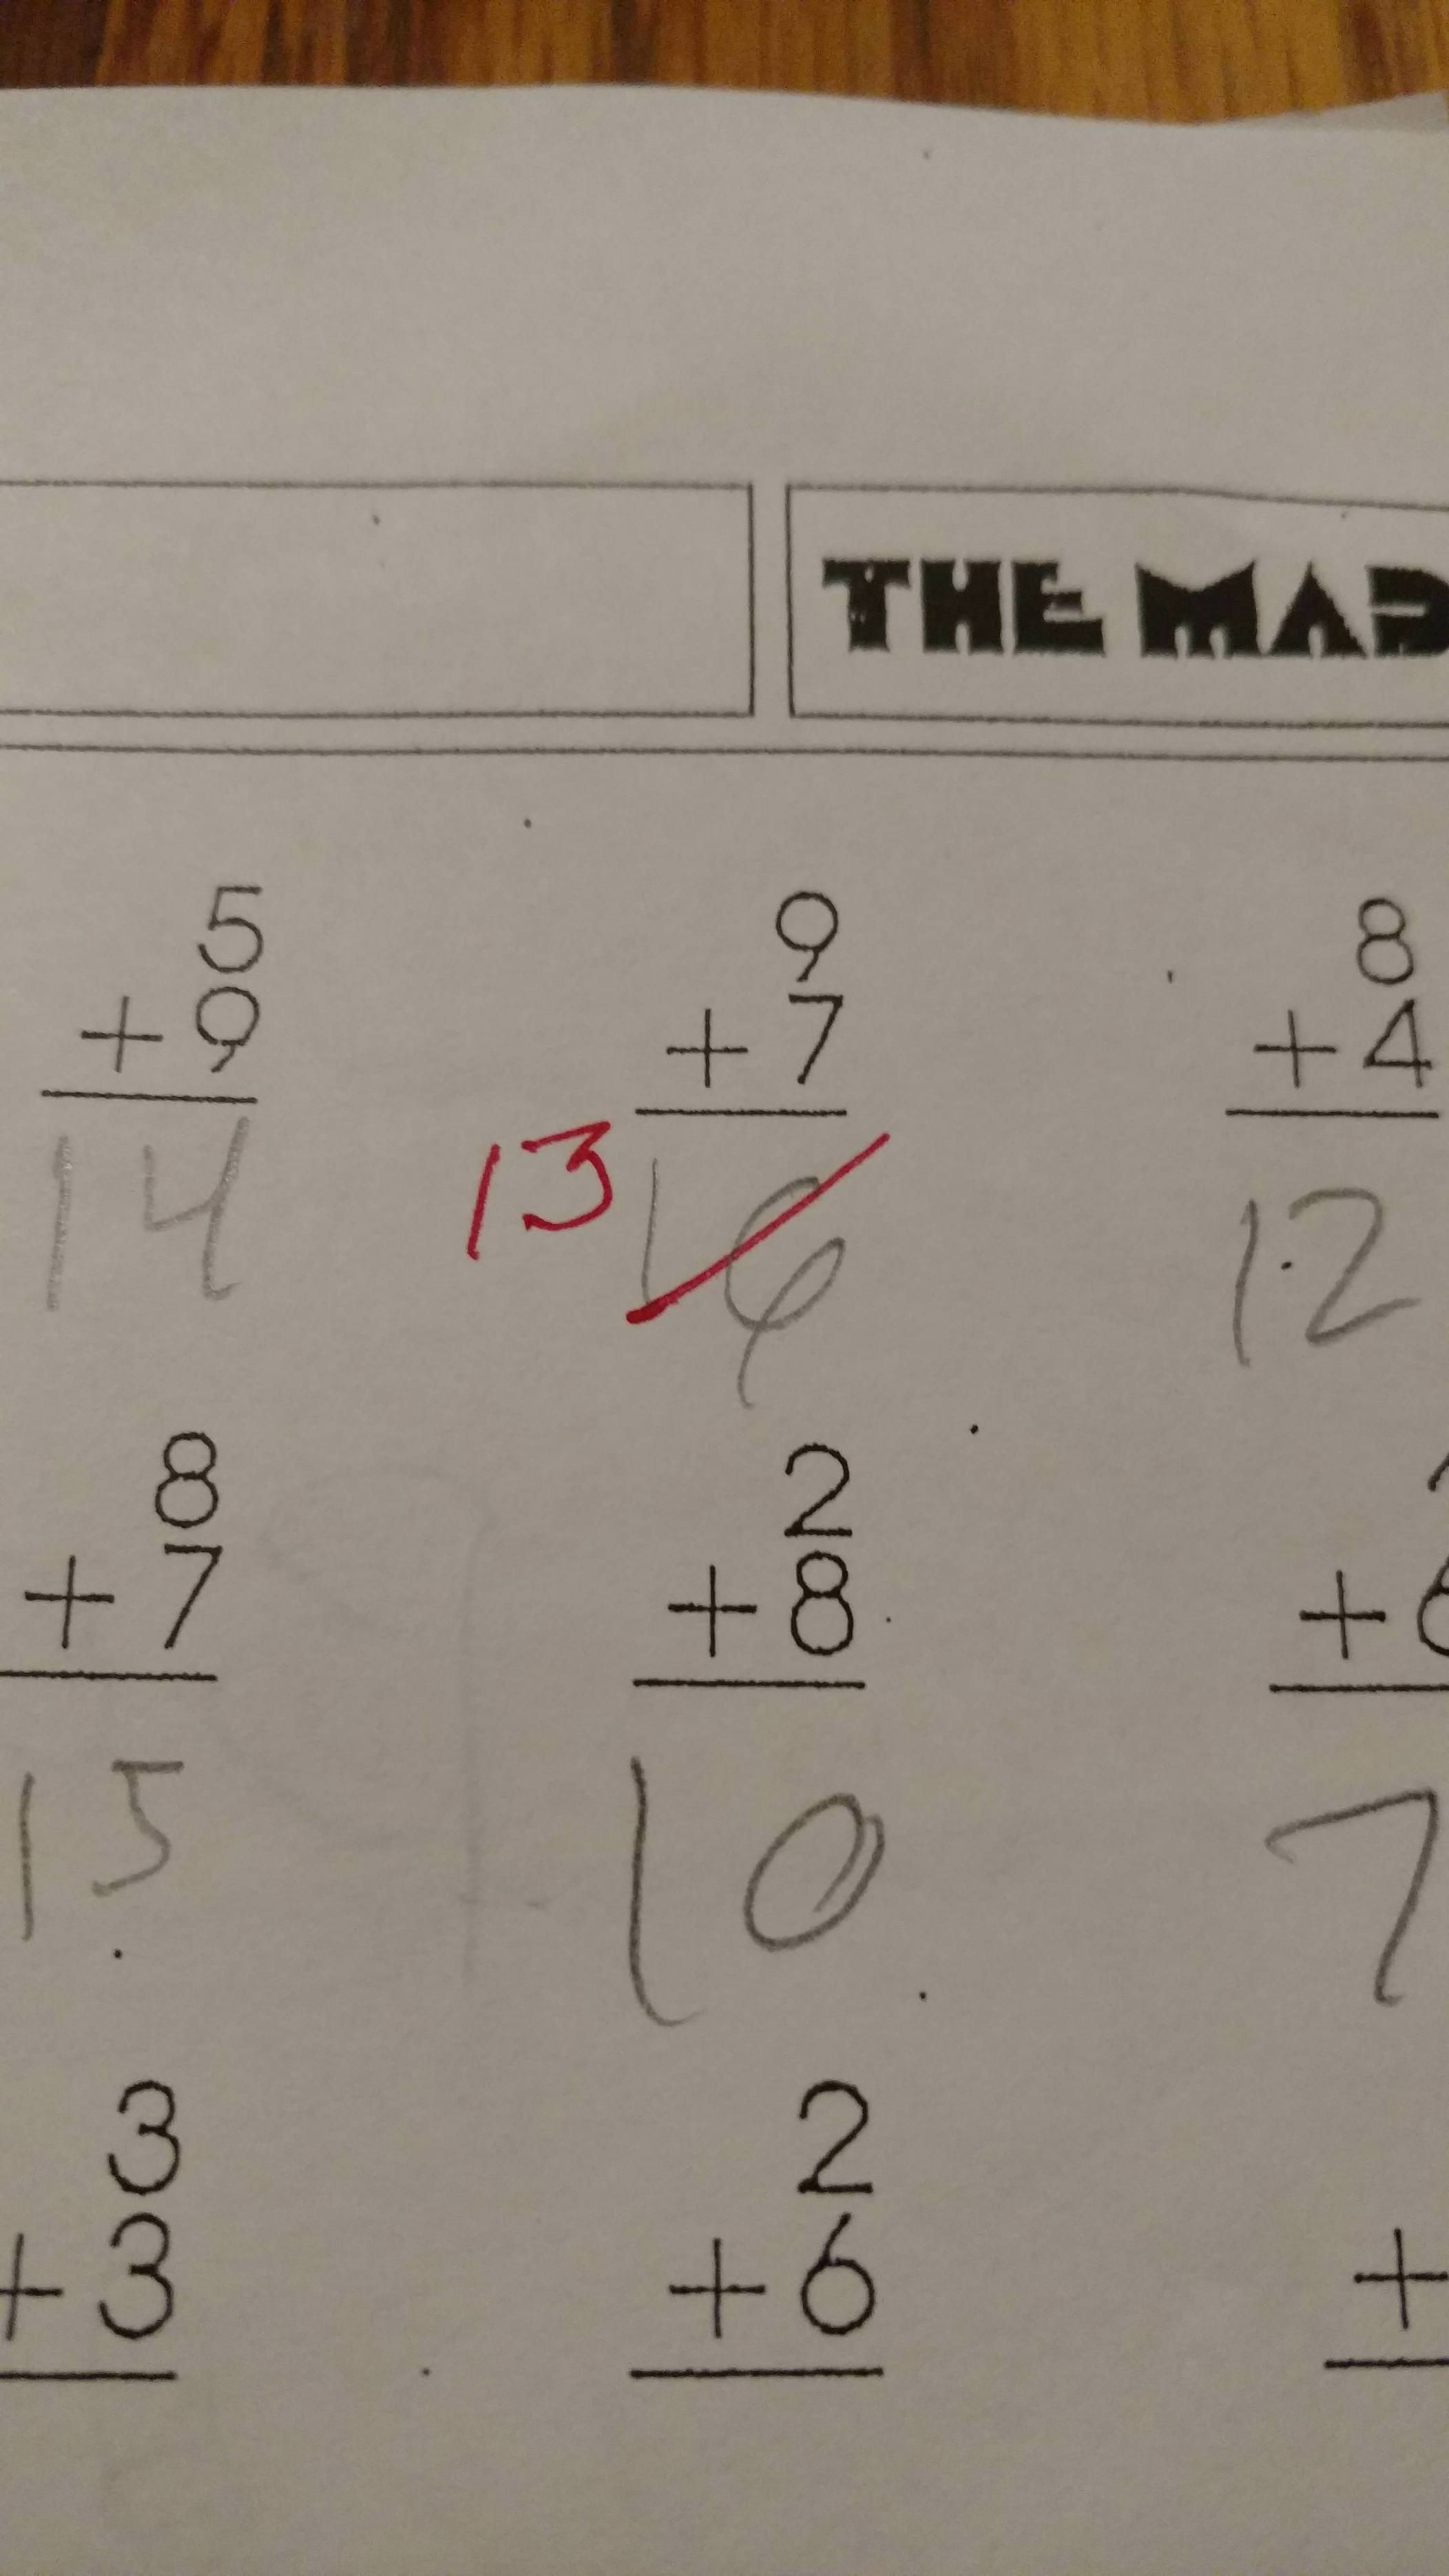 My daughter had a math test at school. Time to switch schools.